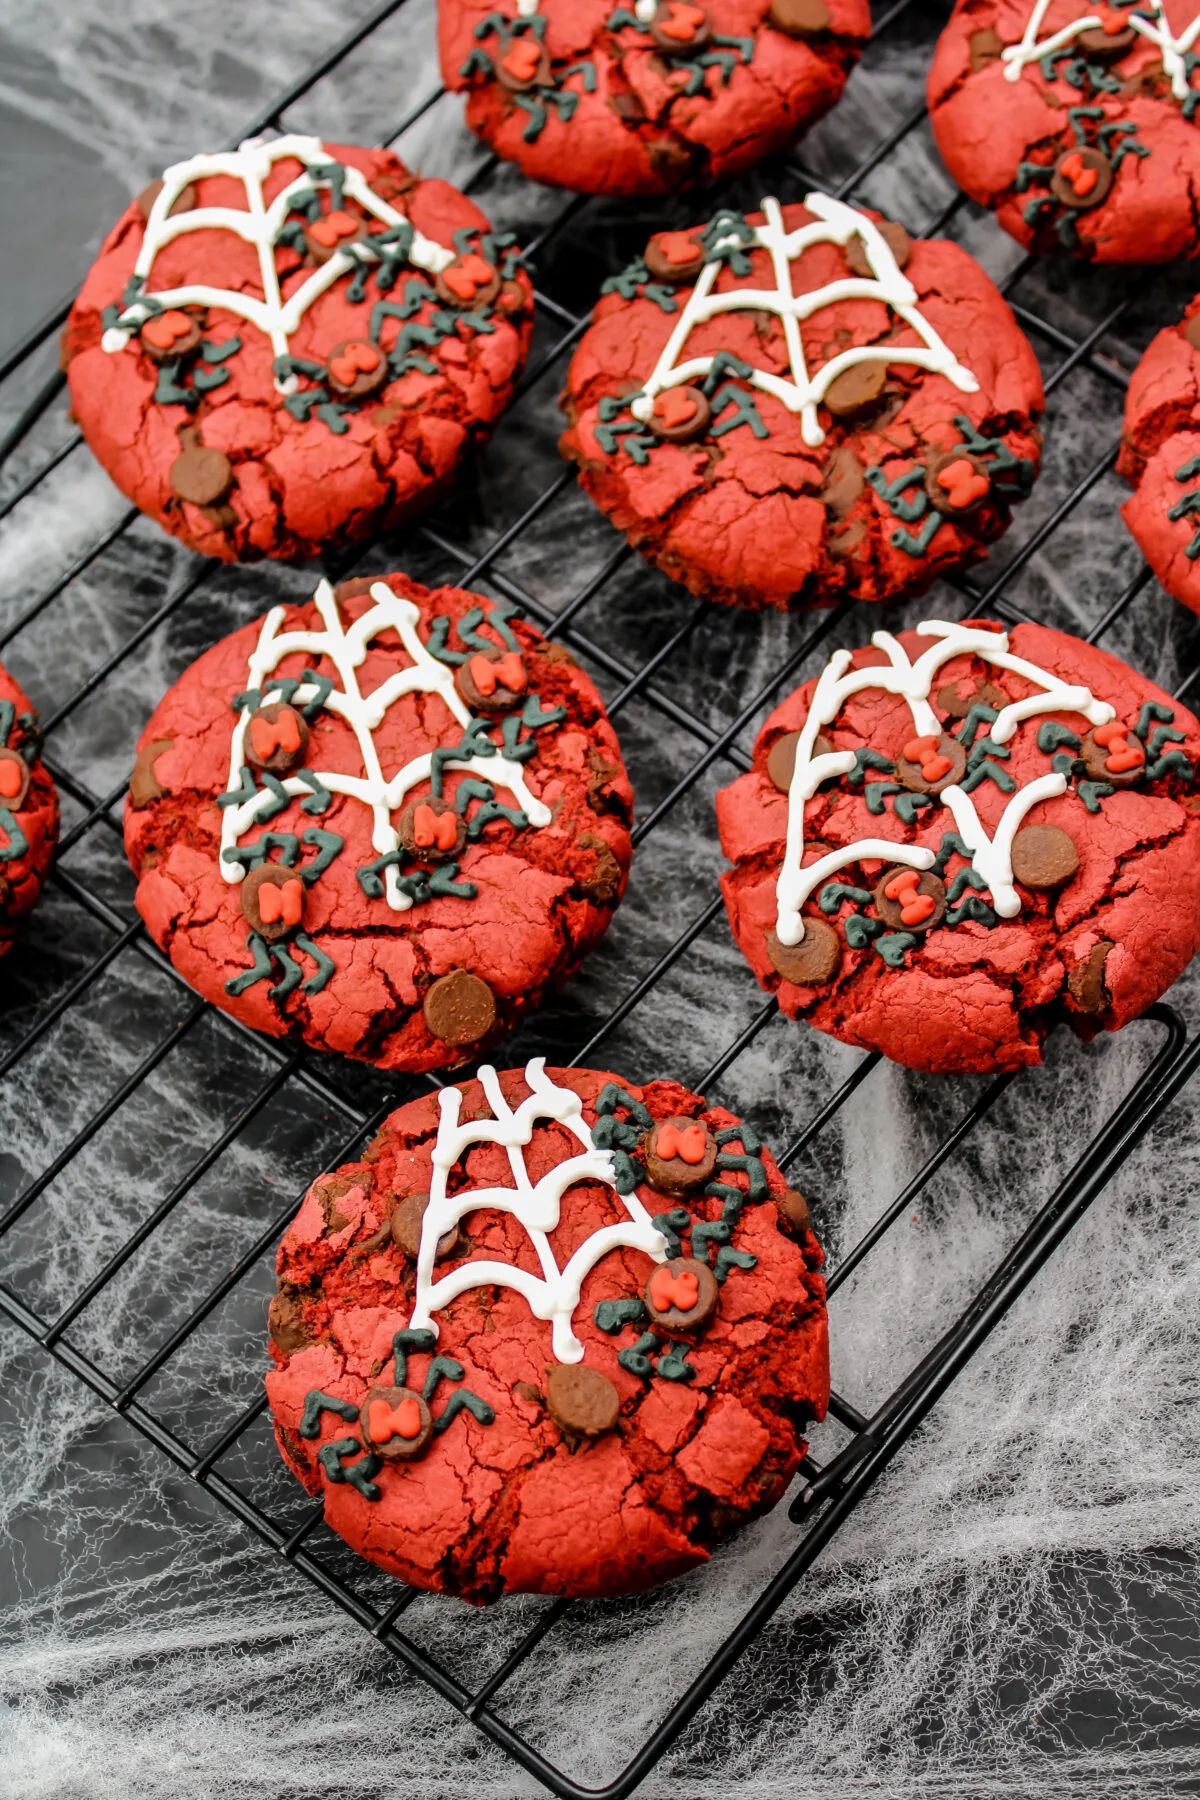 These spooky red velvet Halloween spider cookies are perfect for Halloween! They're easy to make, soft and gooey, and loaded with chocolate!